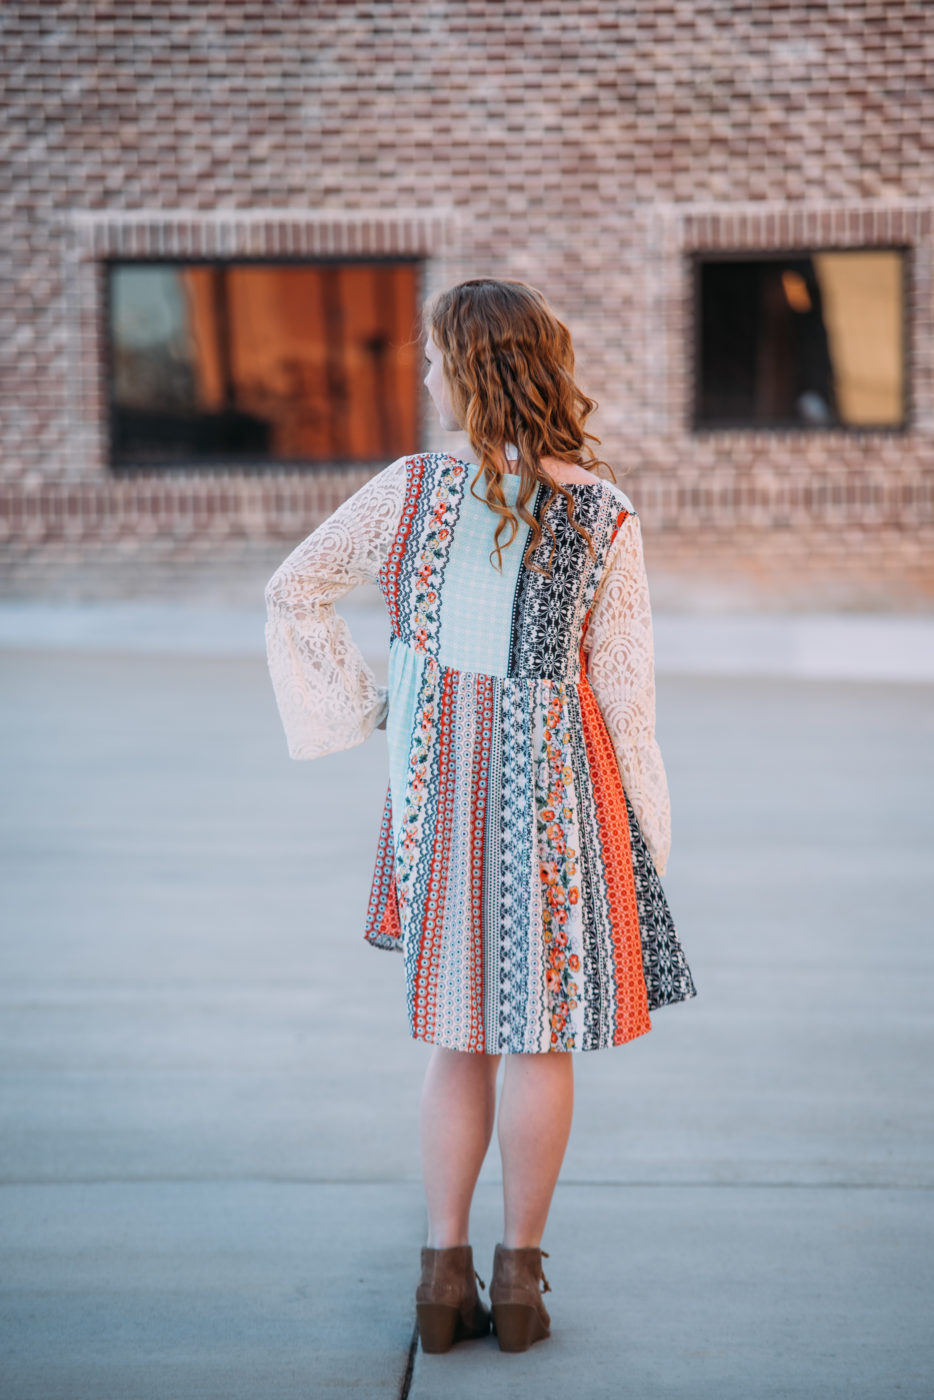 Quirky Charm Patterned Dress